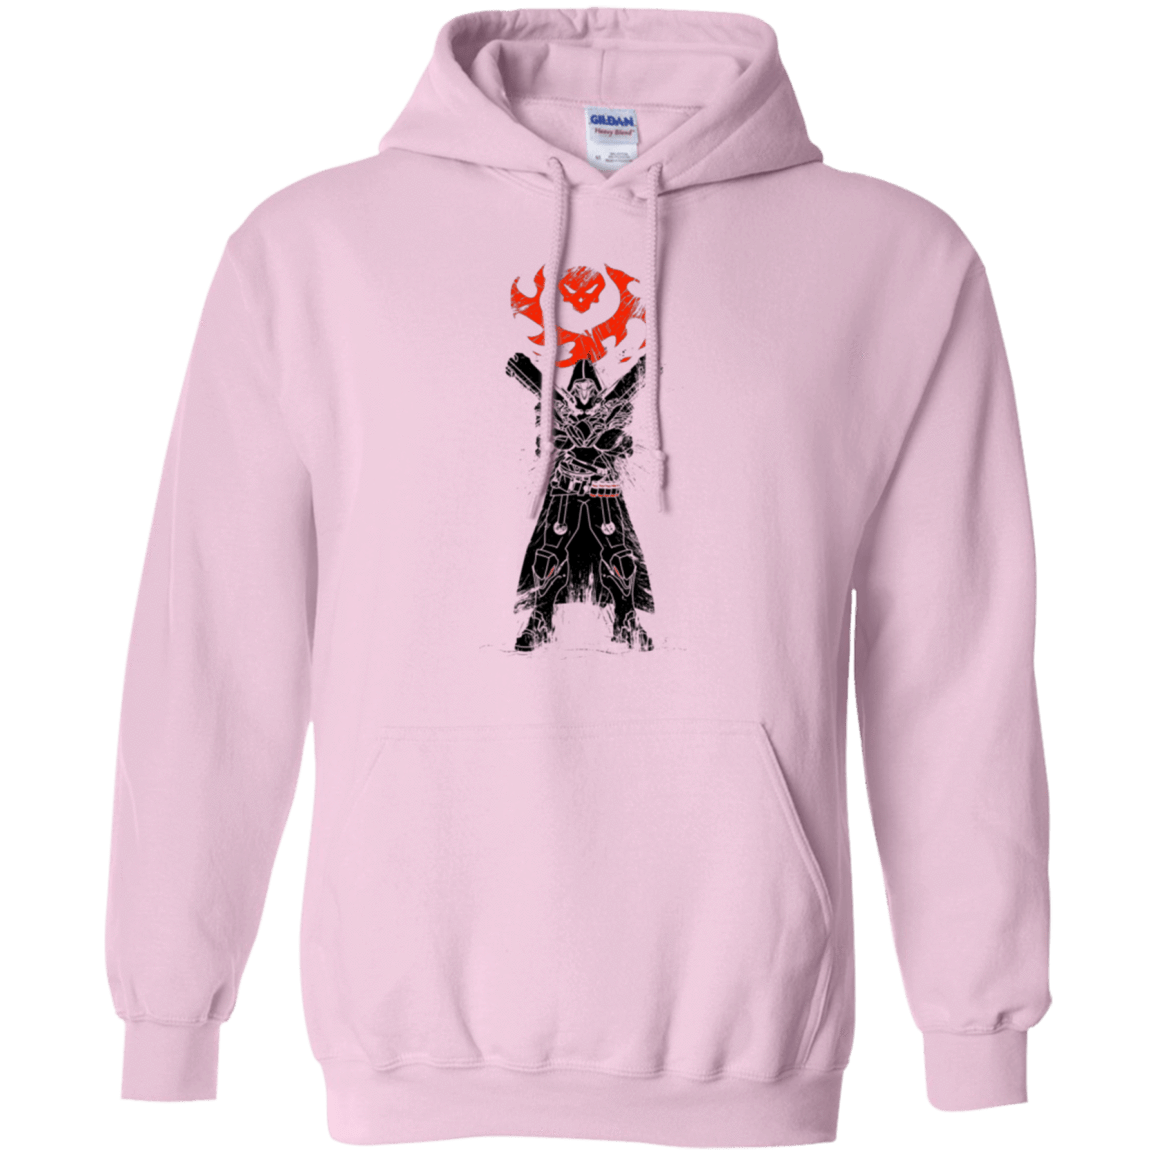 Sweatshirts Light Pink / Small TRADITIONAL REAPER Pullover Hoodie